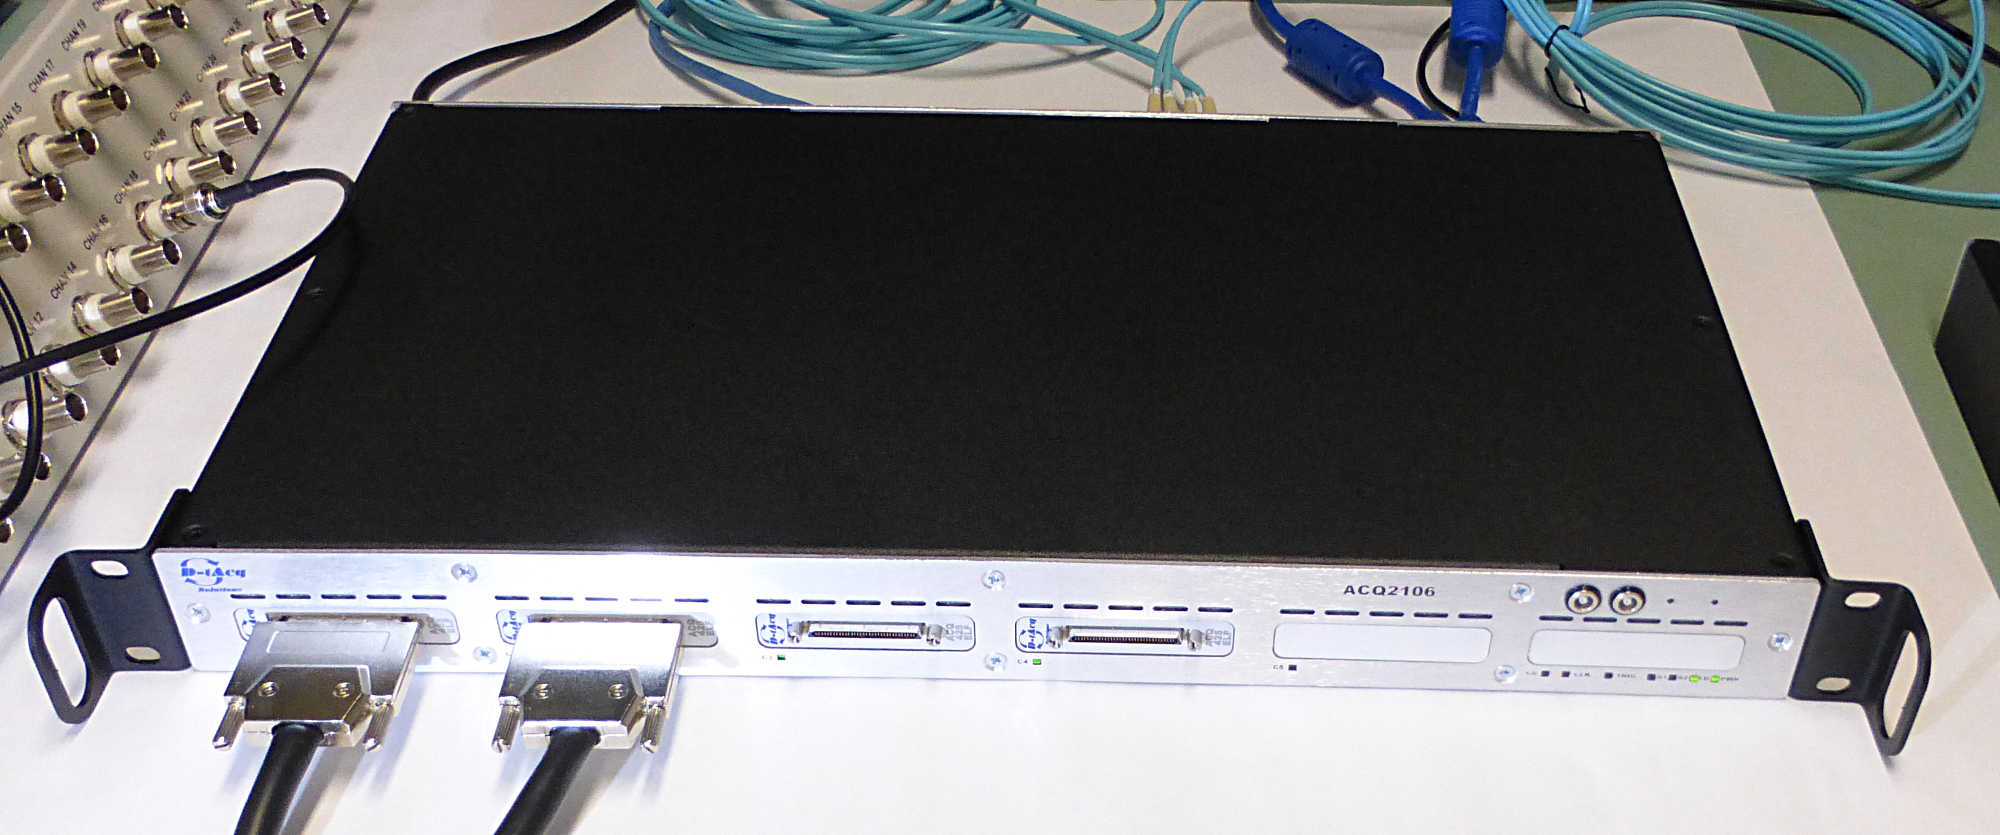 ACQ2106 fitted with 64 channels, 2MSPS/channel streaming data payload.